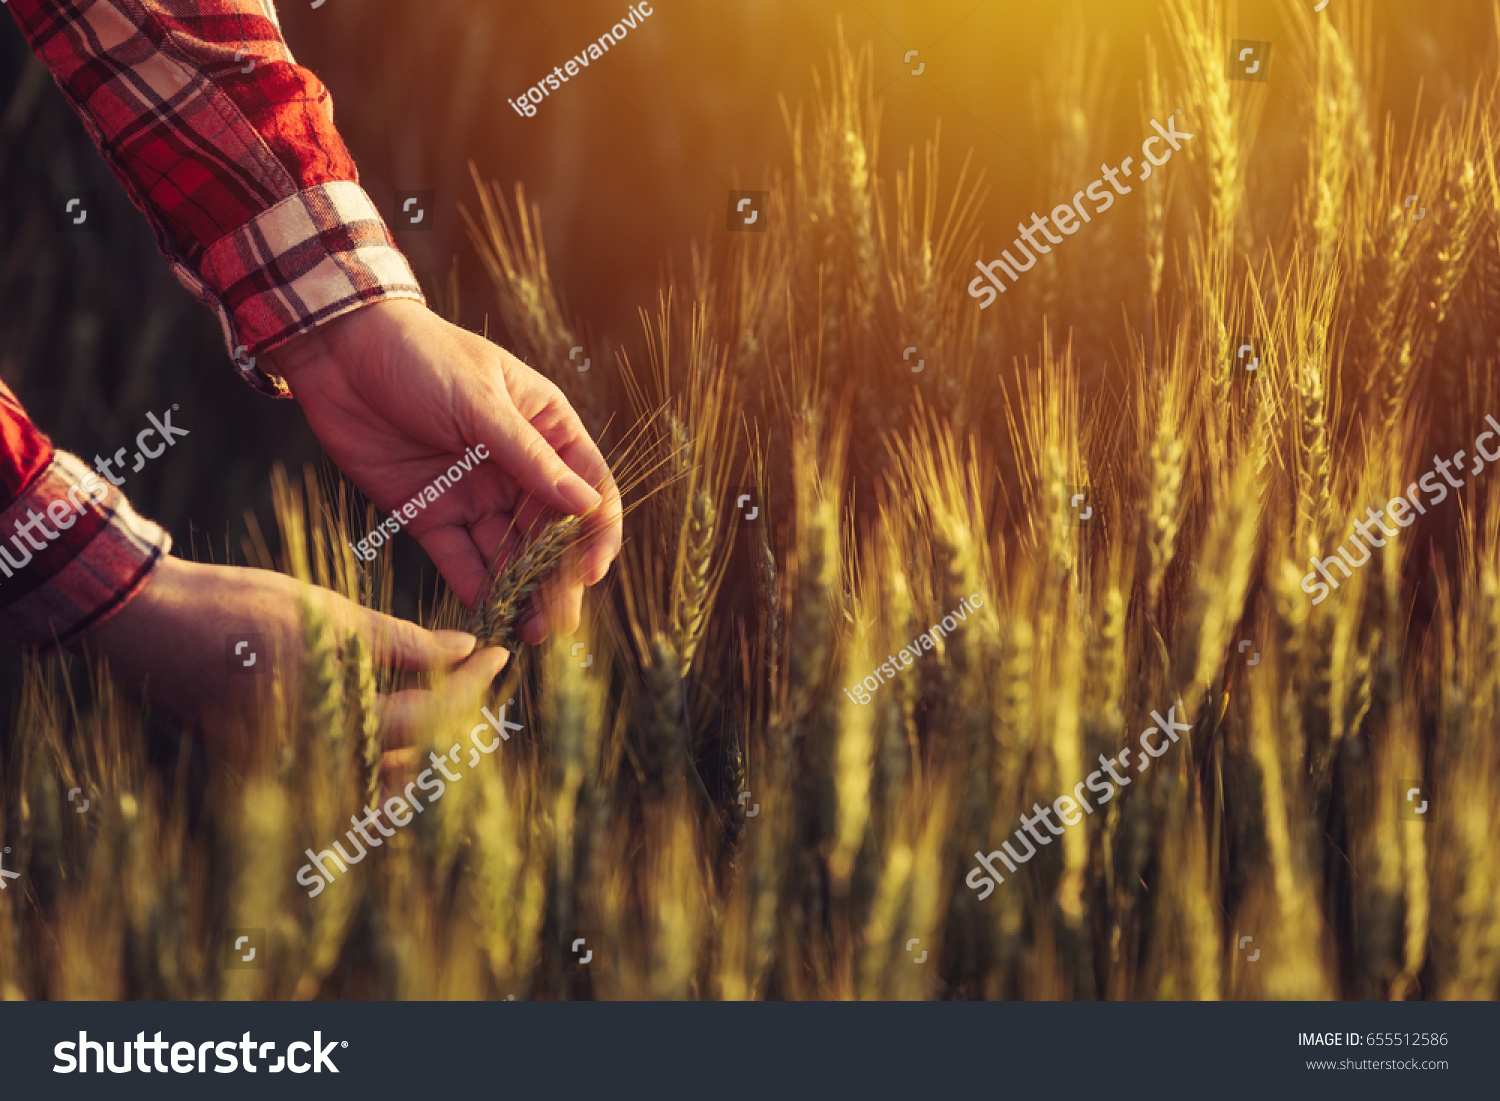 Agronomist examining ripe wheat crop spikelets in cultivated agricultural field #655512586